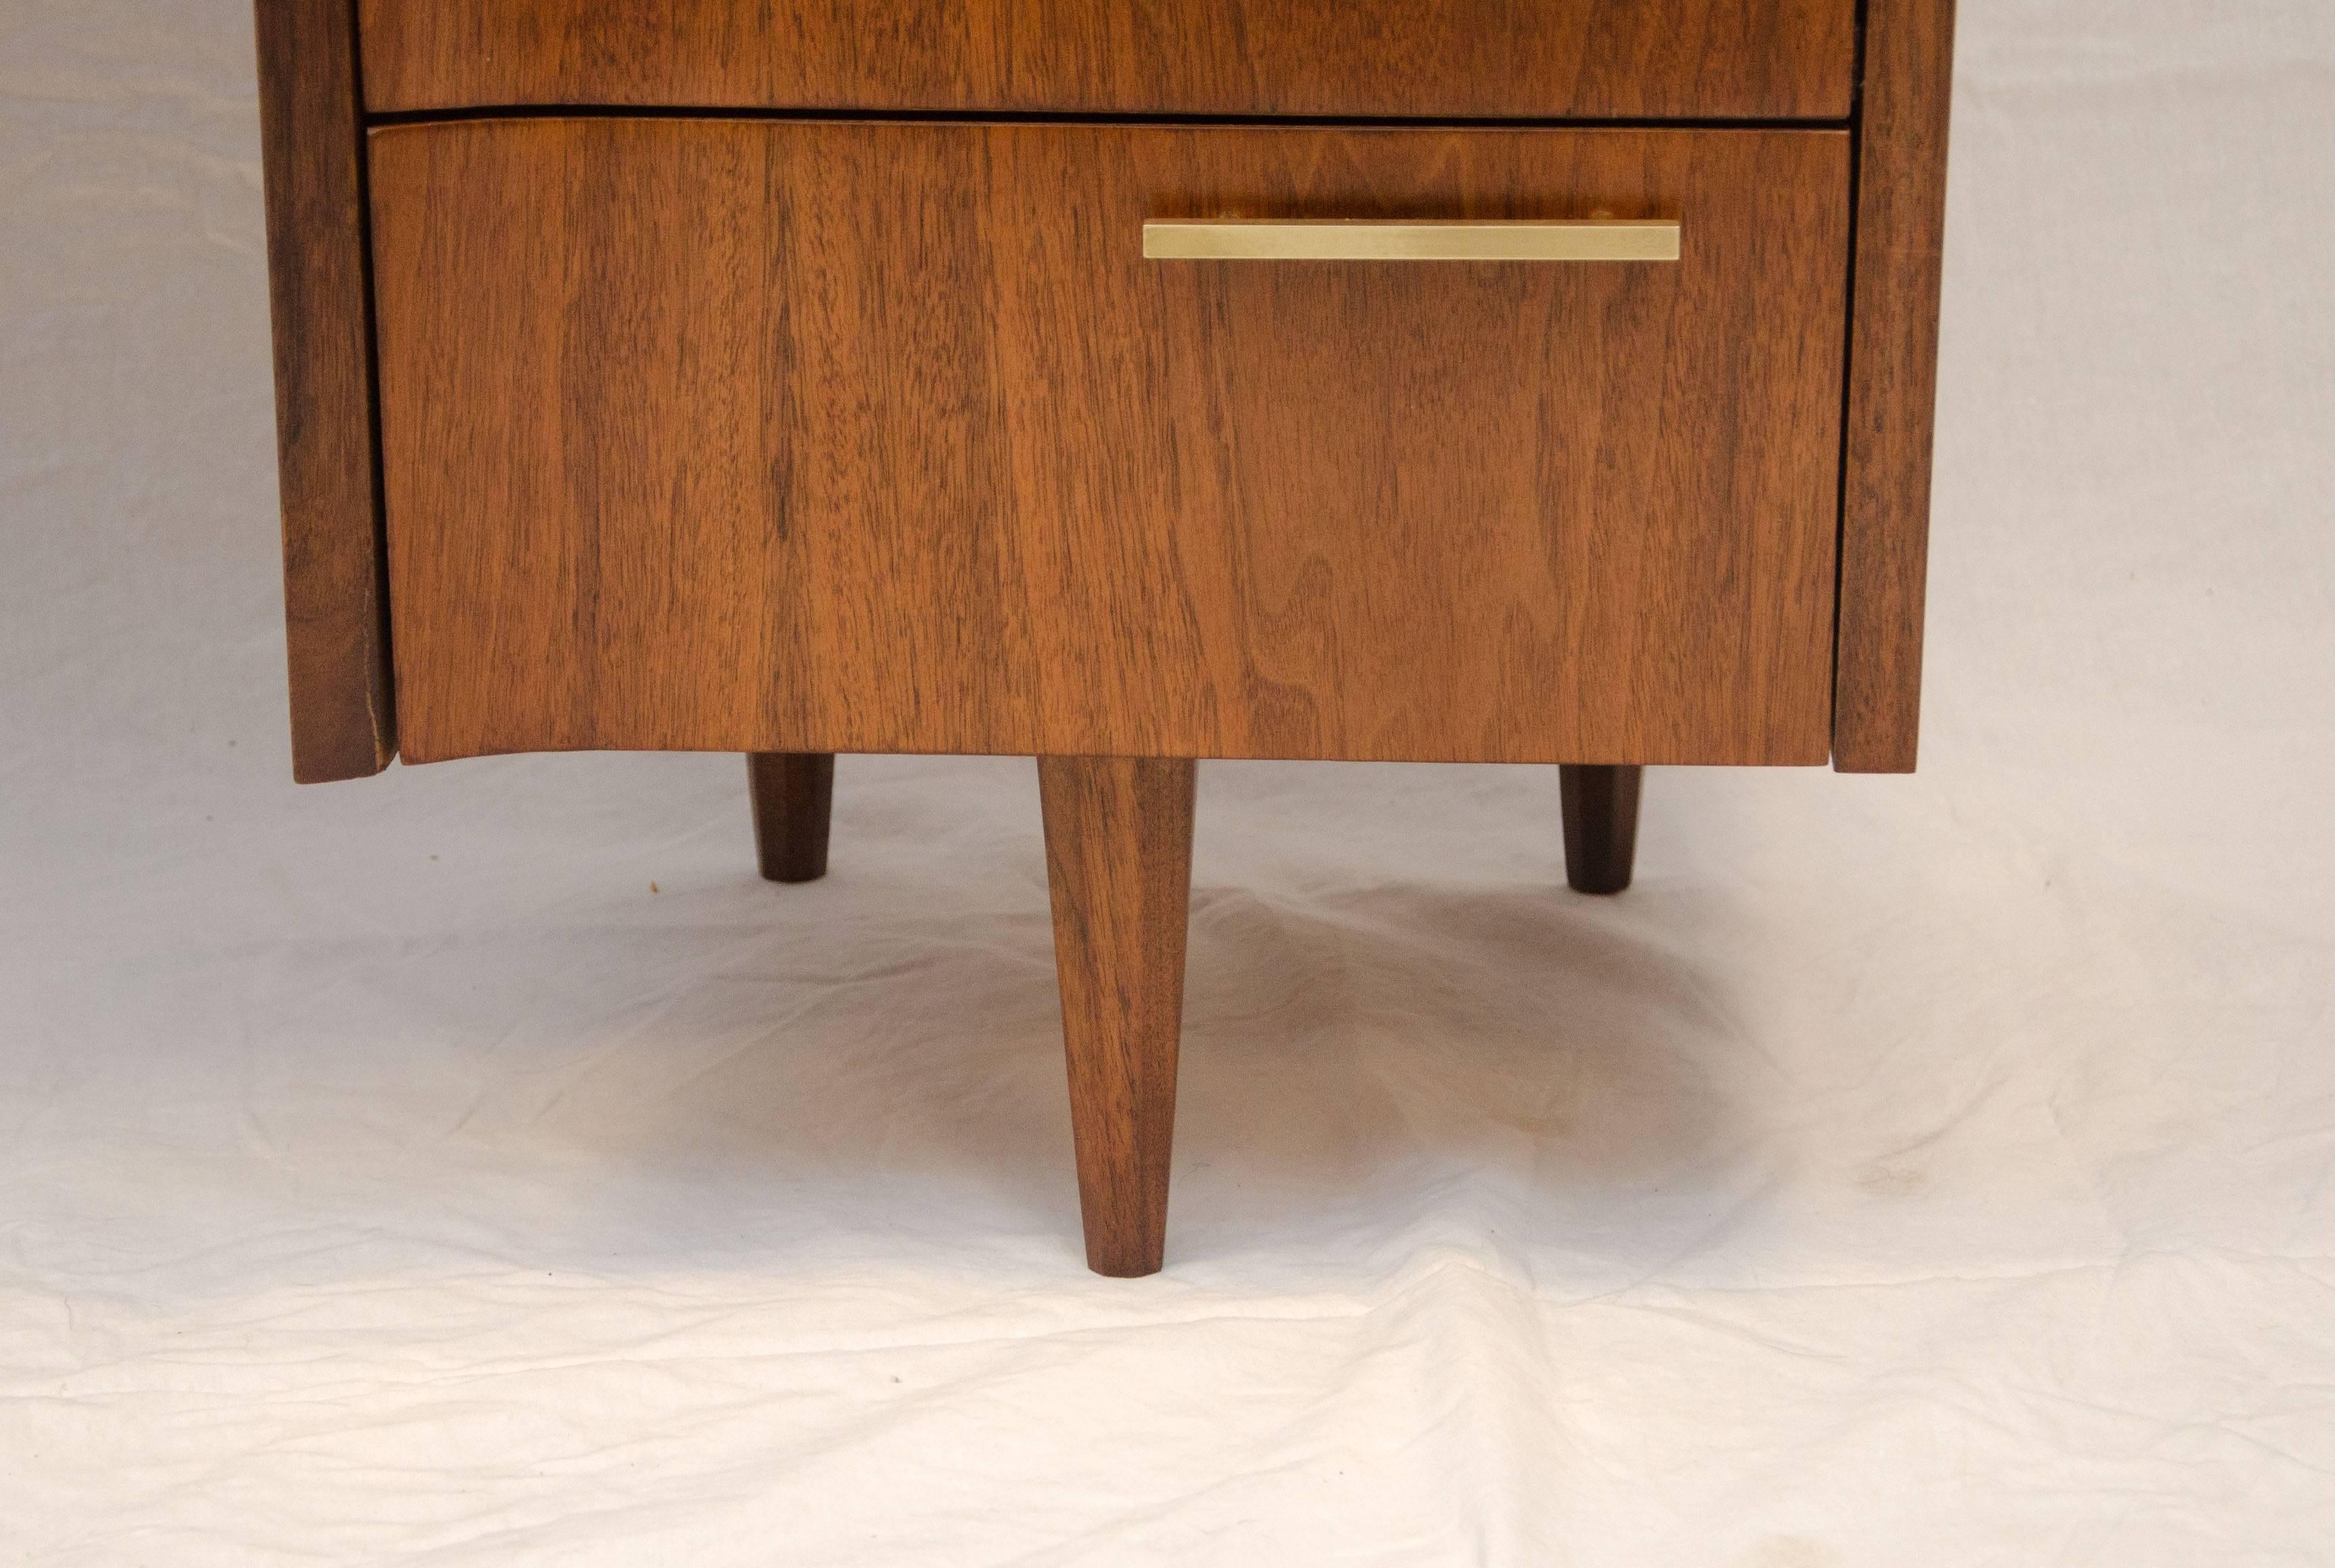 20th Century Midcentury Walnut Curved Desk, Floating Top